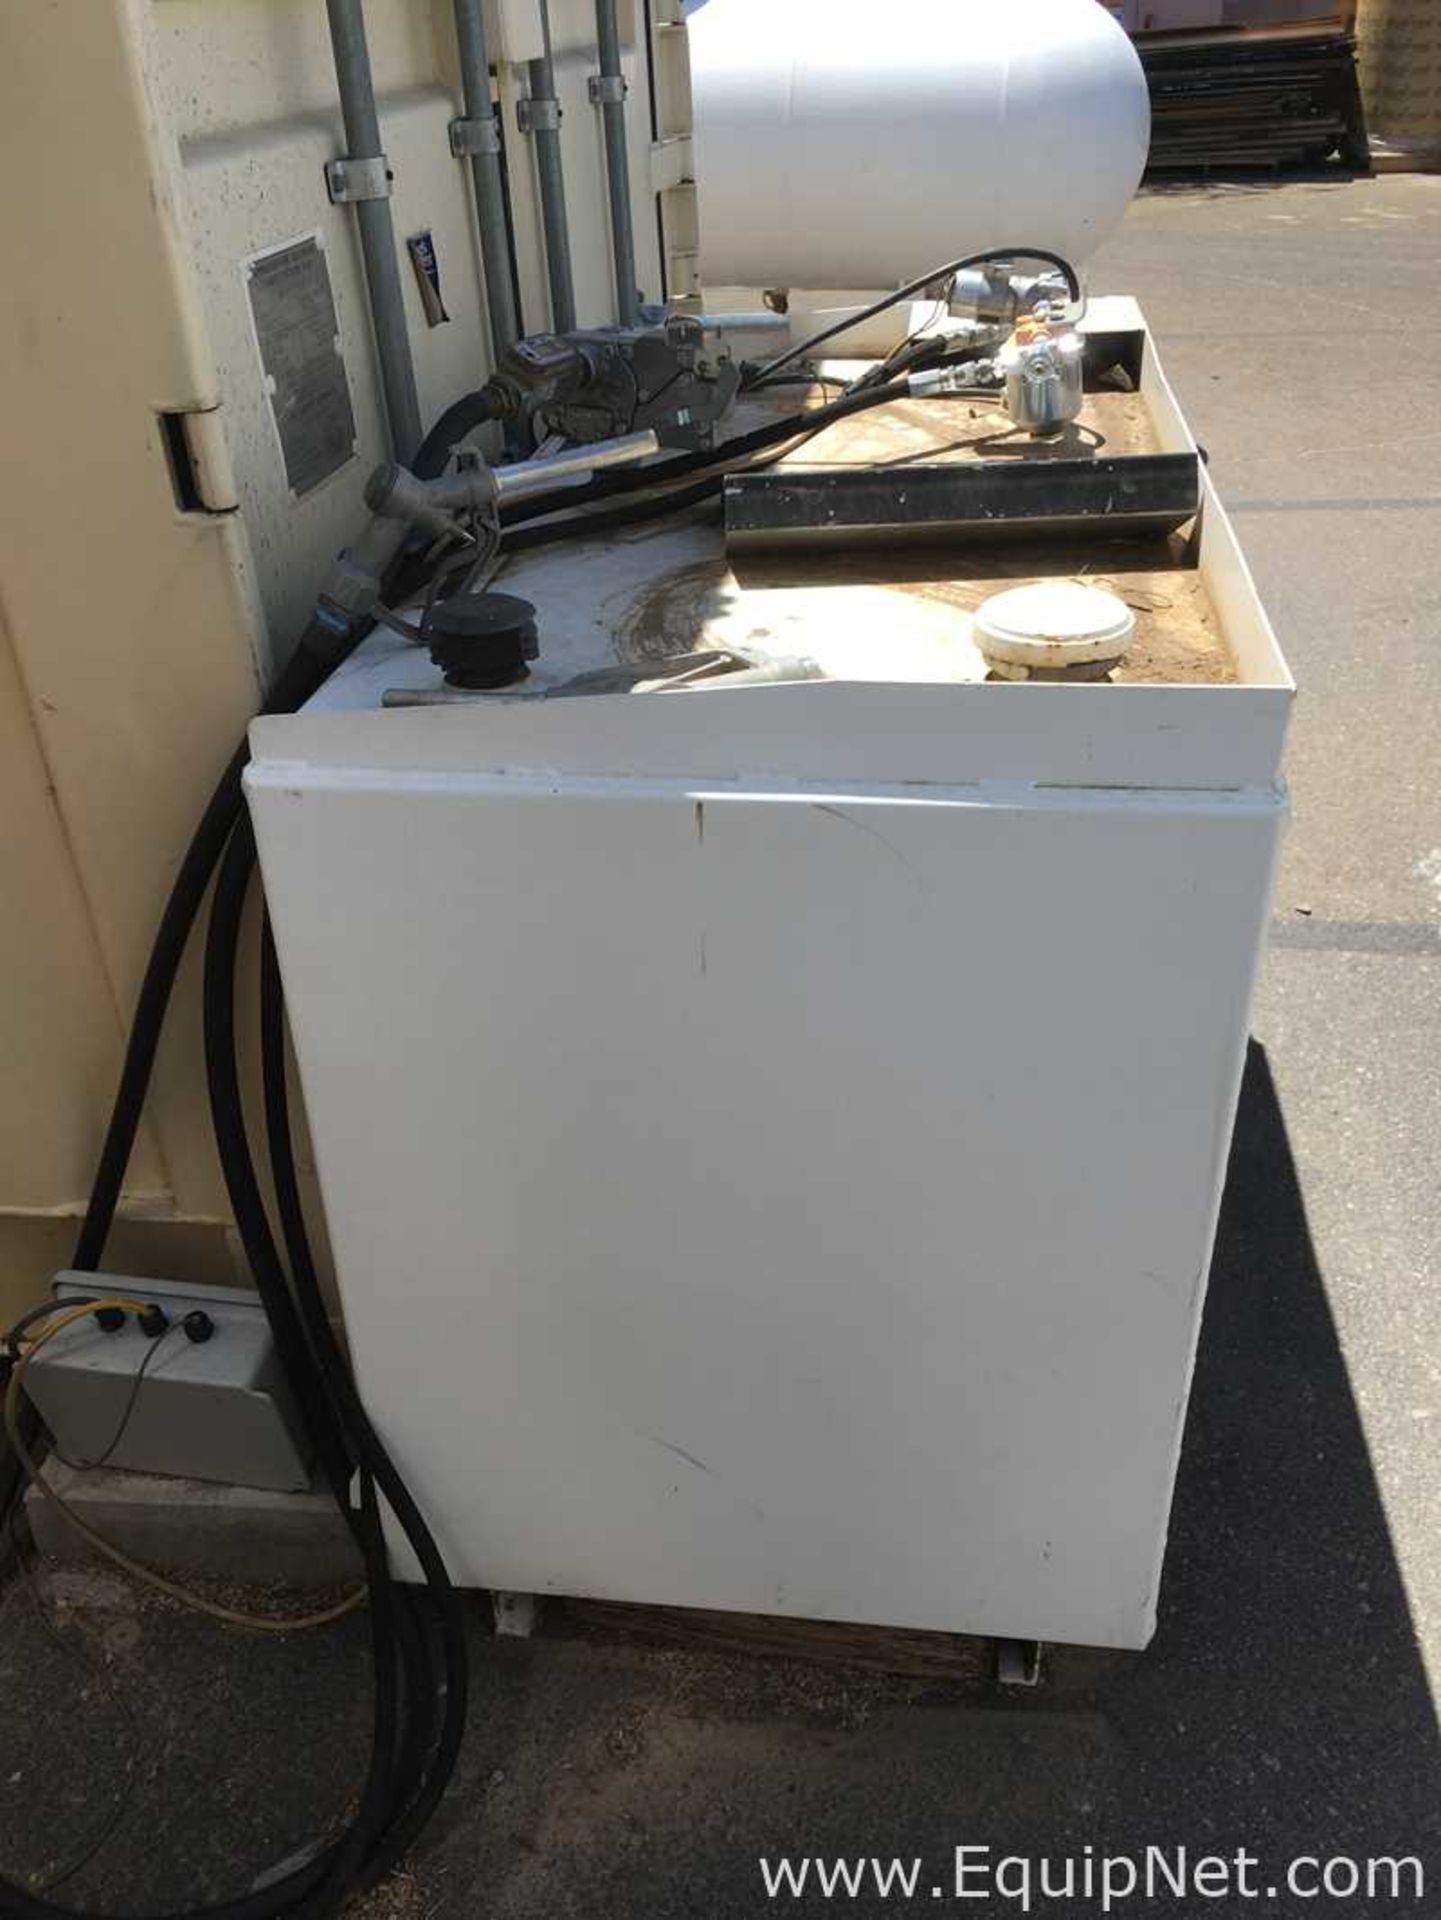 280 Gallon Diesel Fuel Tank with Electric Pump - Image 2 of 4